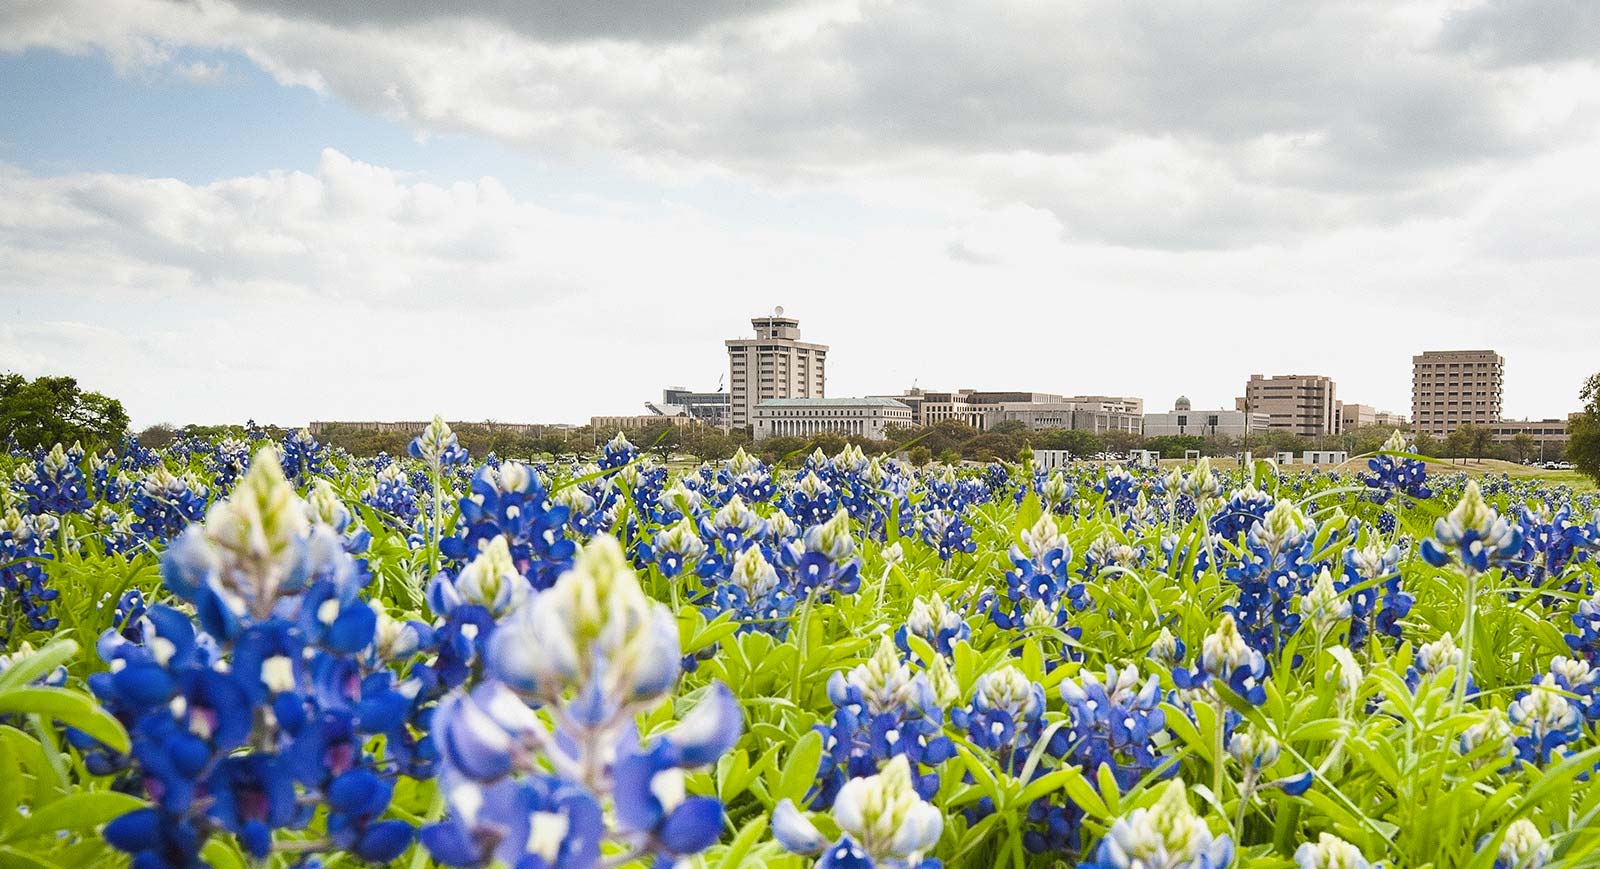 Bluebonnets near the front entrance of Texas A&M's campus